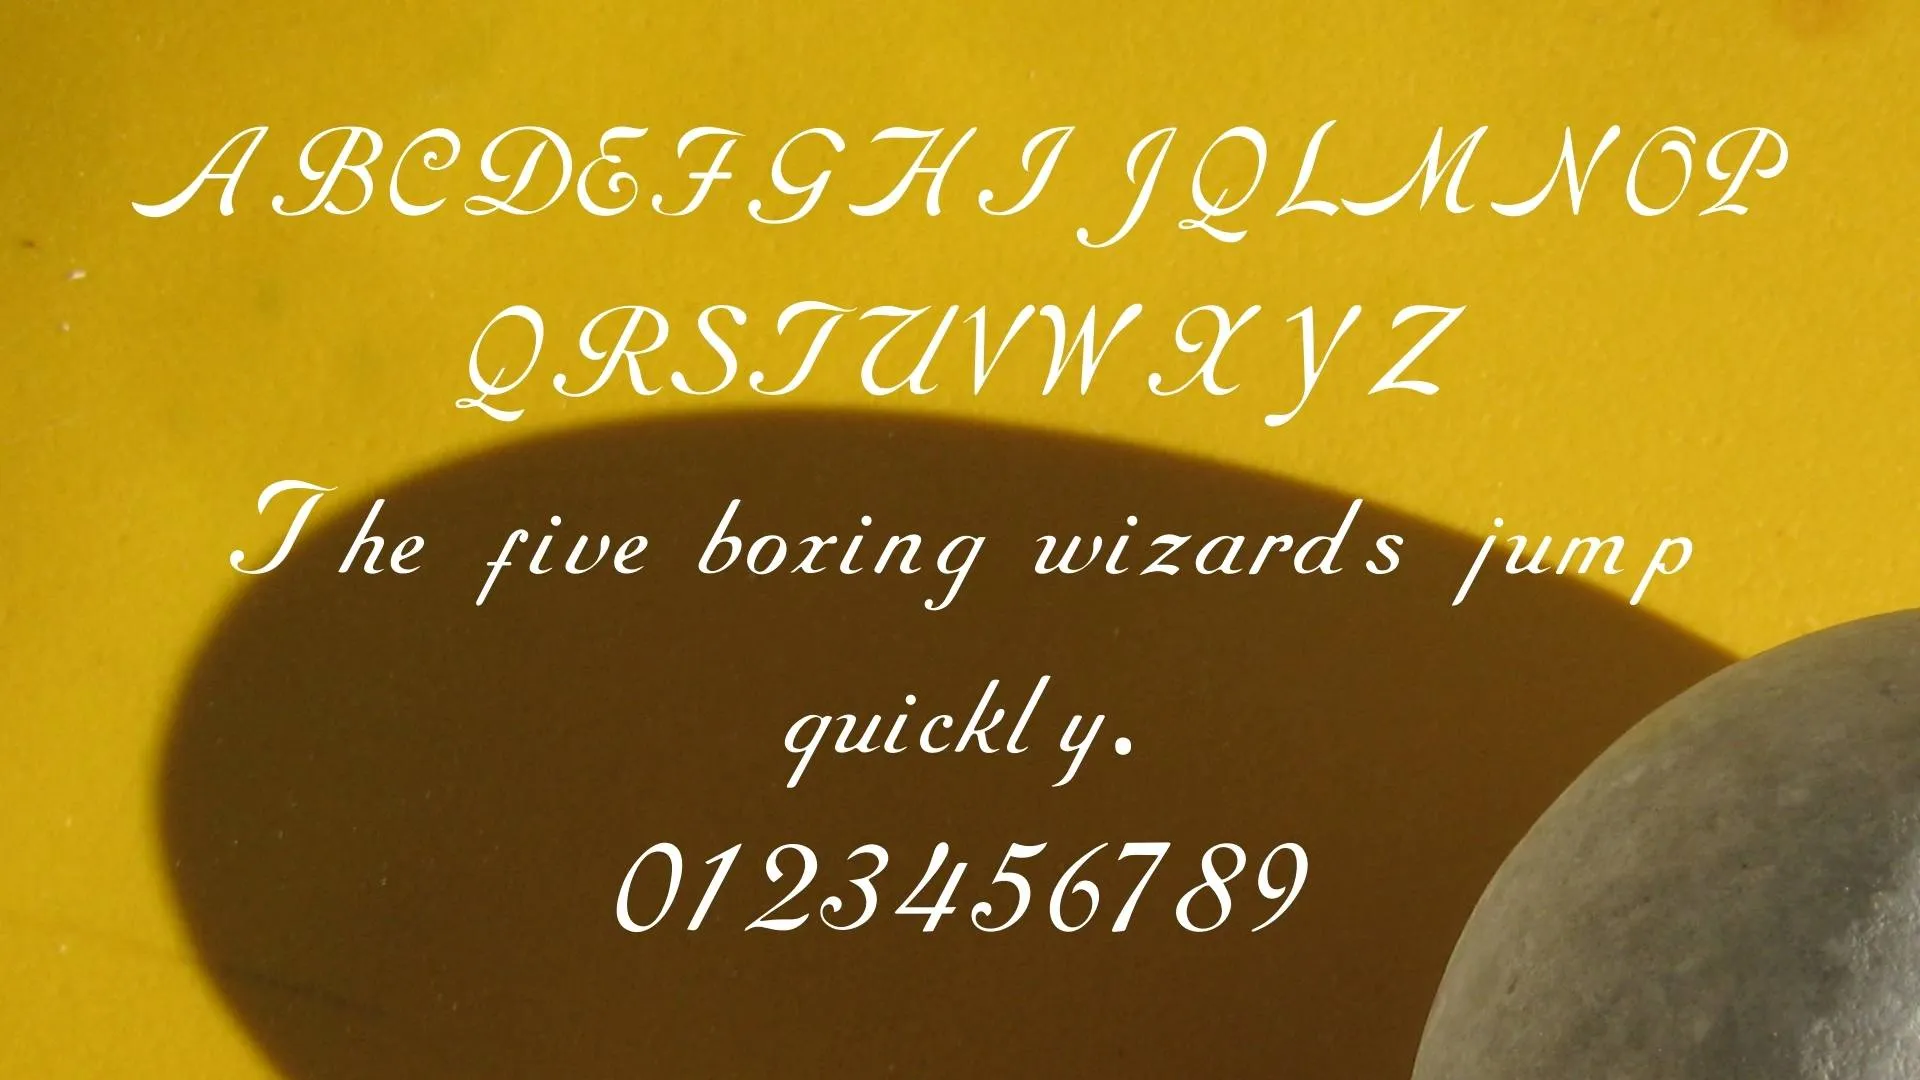 Roundhand Font